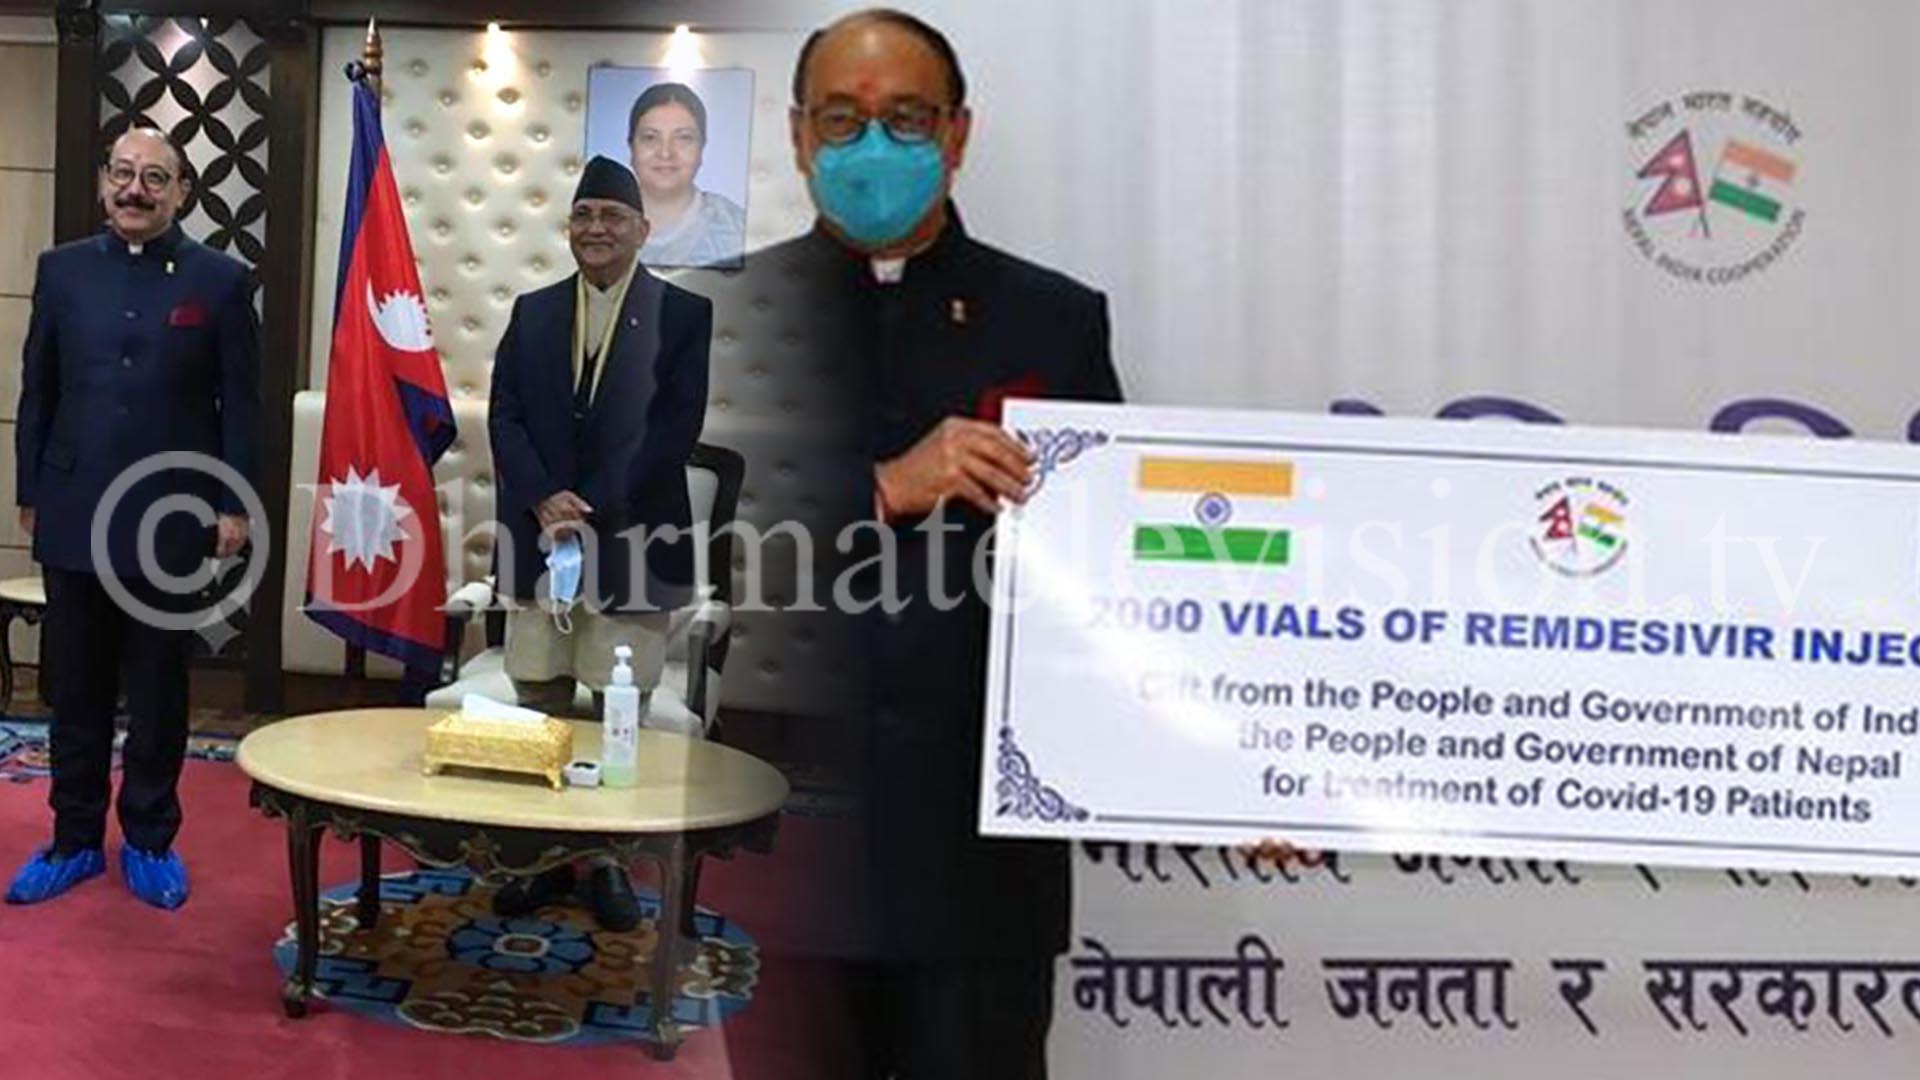 Government of India provides 2,000 units of Remedesivir Injection to Nepal